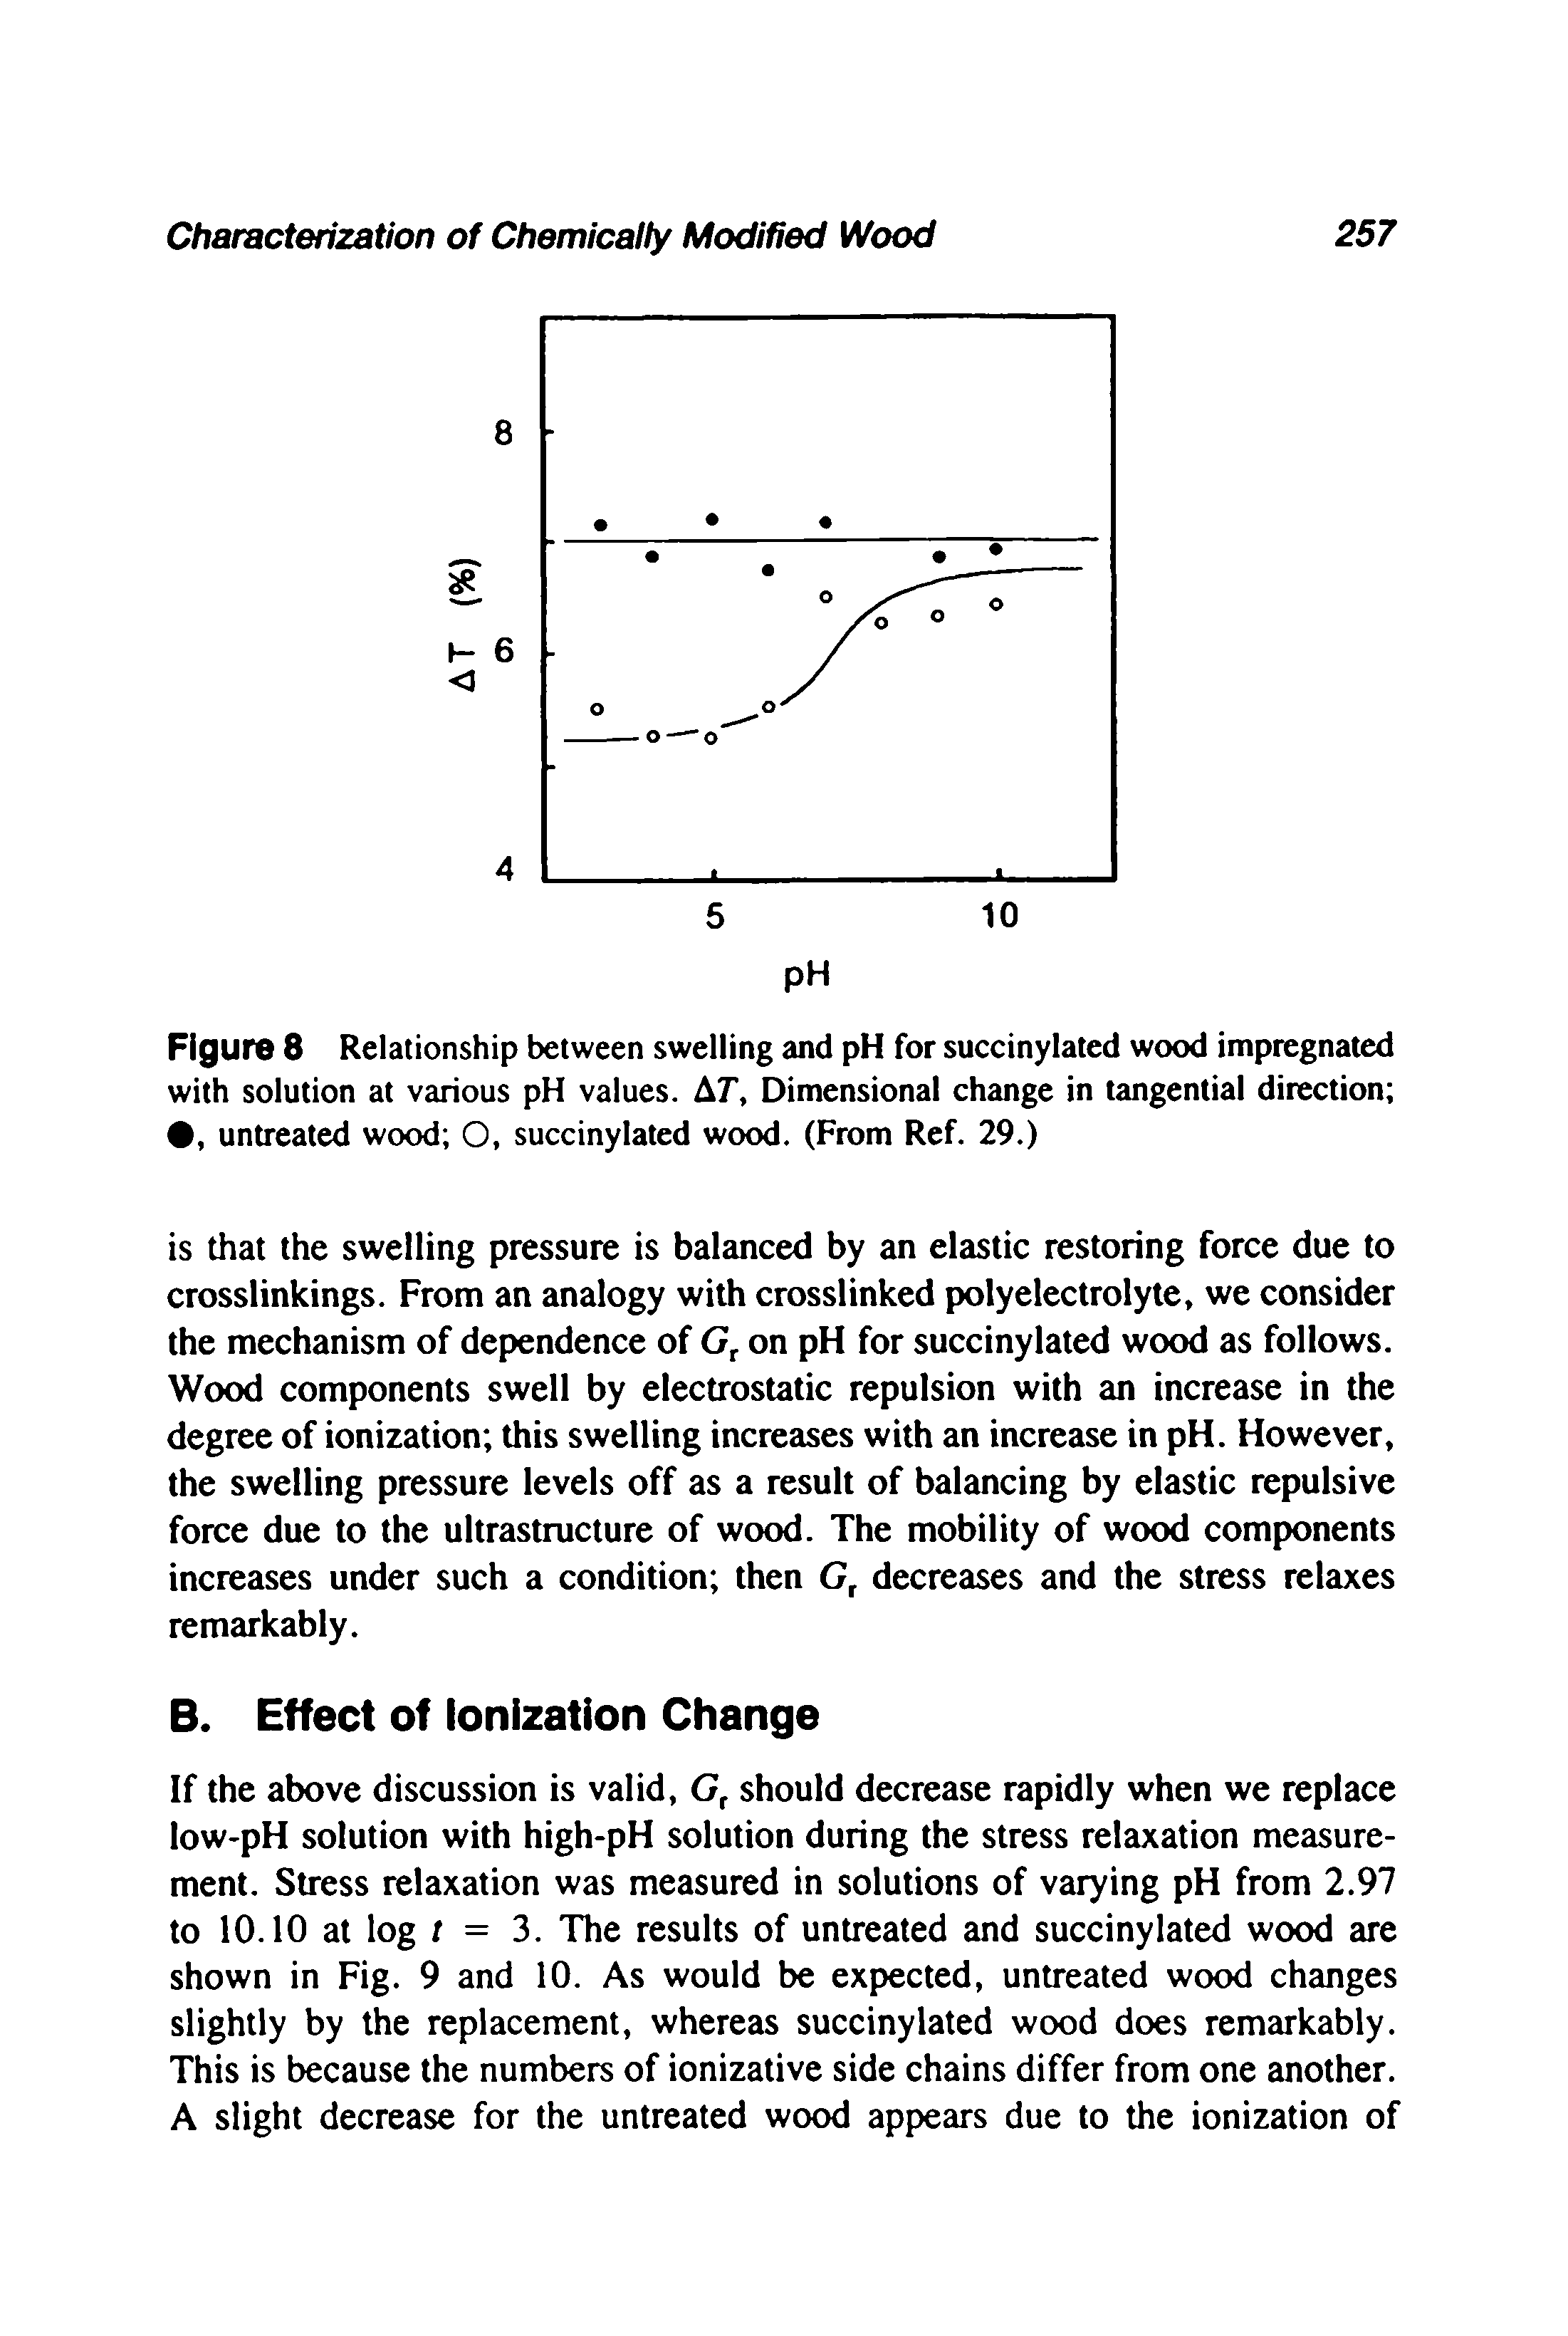 Figure 8 Relationship between swelling and pH for succinylated wood impregnated with solution at various pH values. AT, Dimensional change in tangential direction , untreated wood O, succinylated wood. (From Ref. 29.)...